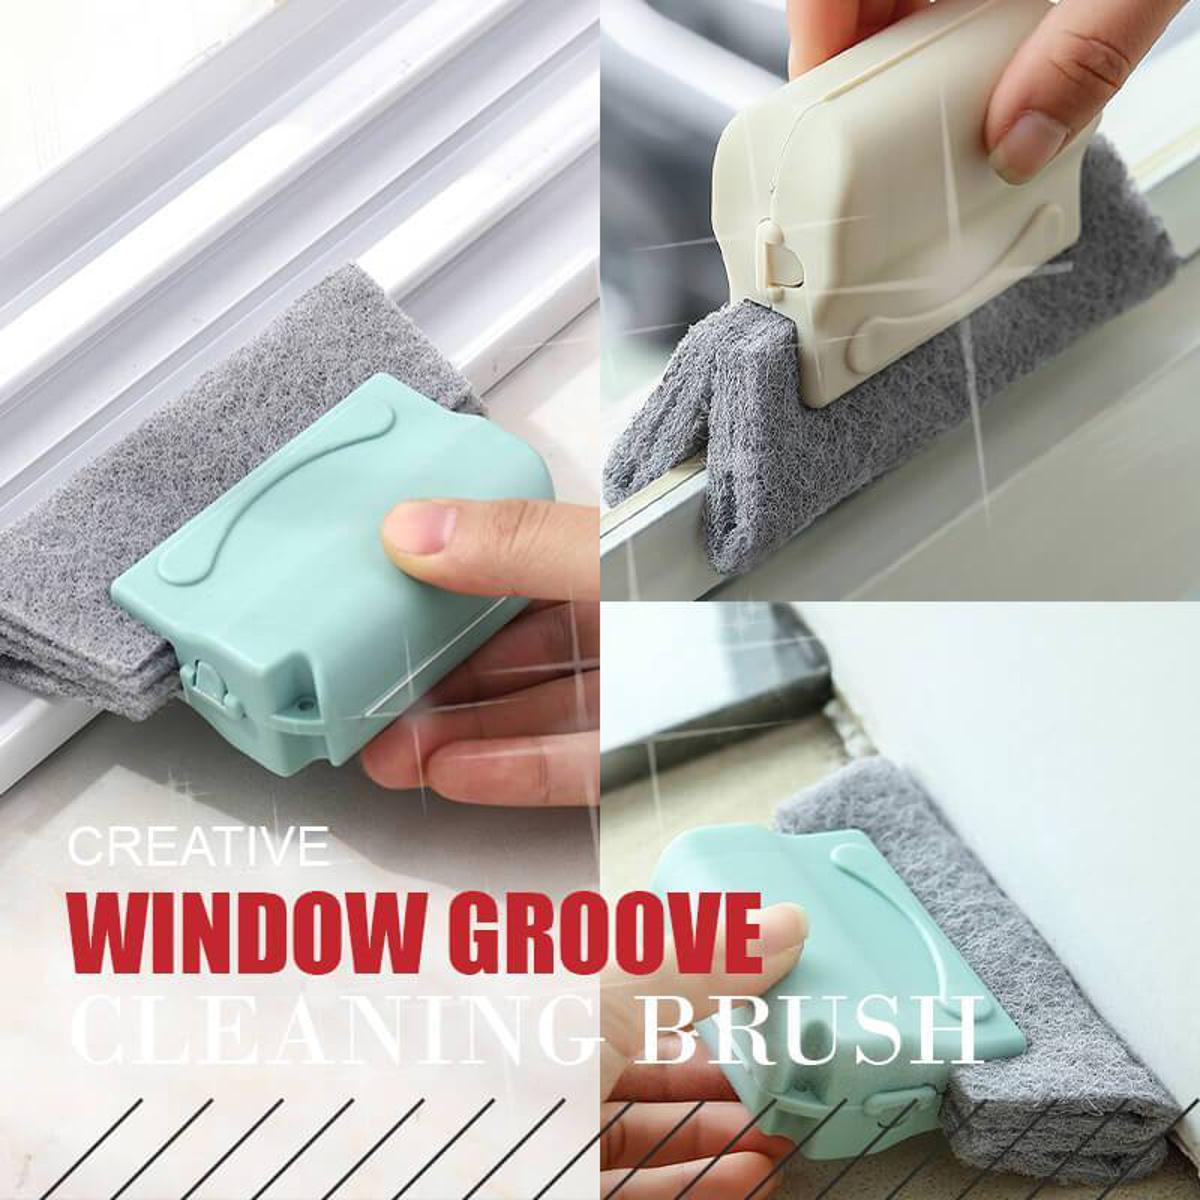 Magic Window Cleaning Brush Creative Window Groove Cleaning Brush Handheld  Crevice Cleaner Tools For Window Crevice